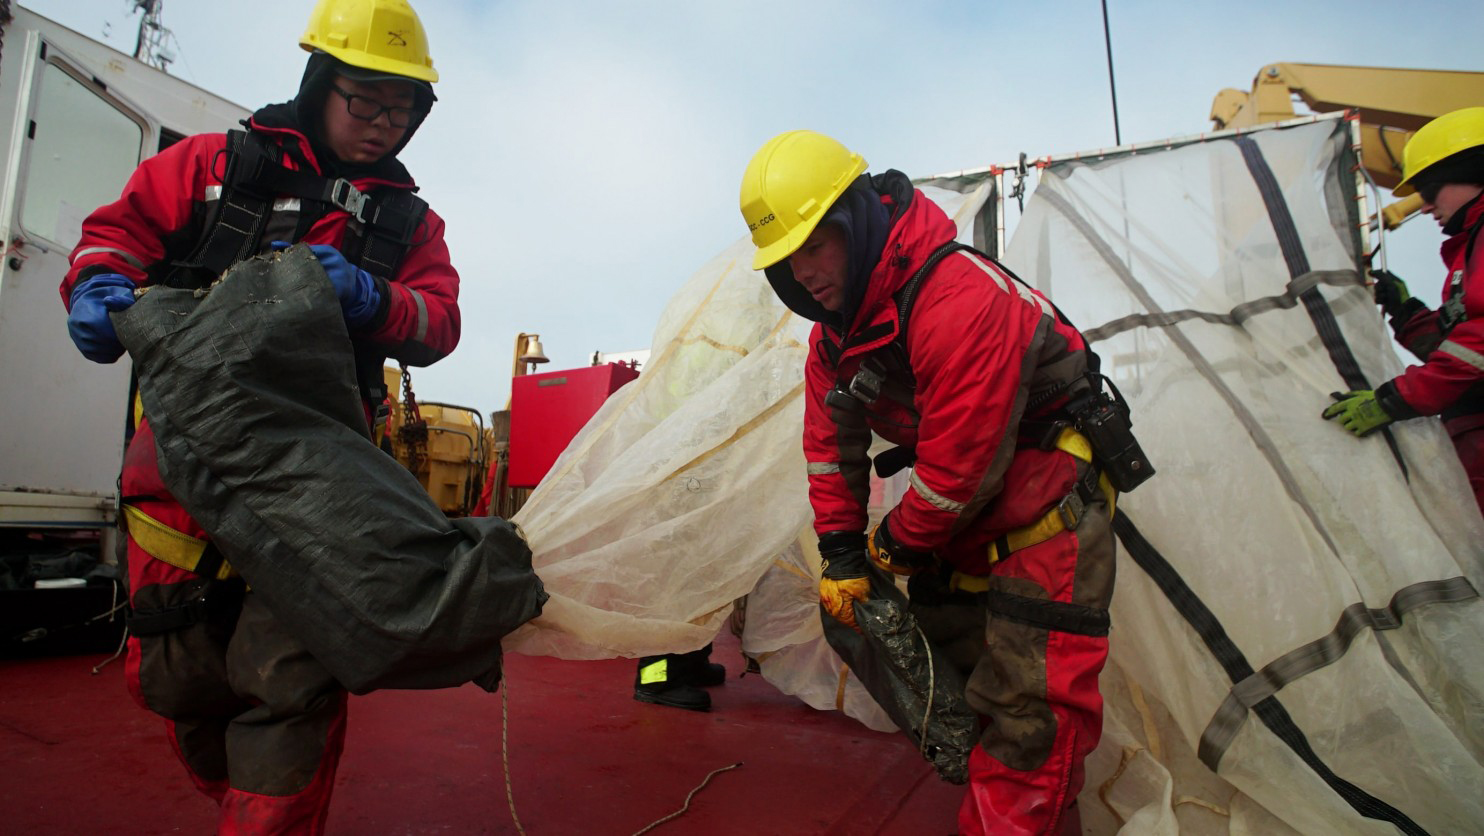 Jasmin Beauregard, left, and Hugo Jacques of the Canadian coast guard prepare nets in the Queen Maud Gulf. The nets are used to scrape the seafloor and capture specimens for researchers to study. (Alice Li / The Washington Post)